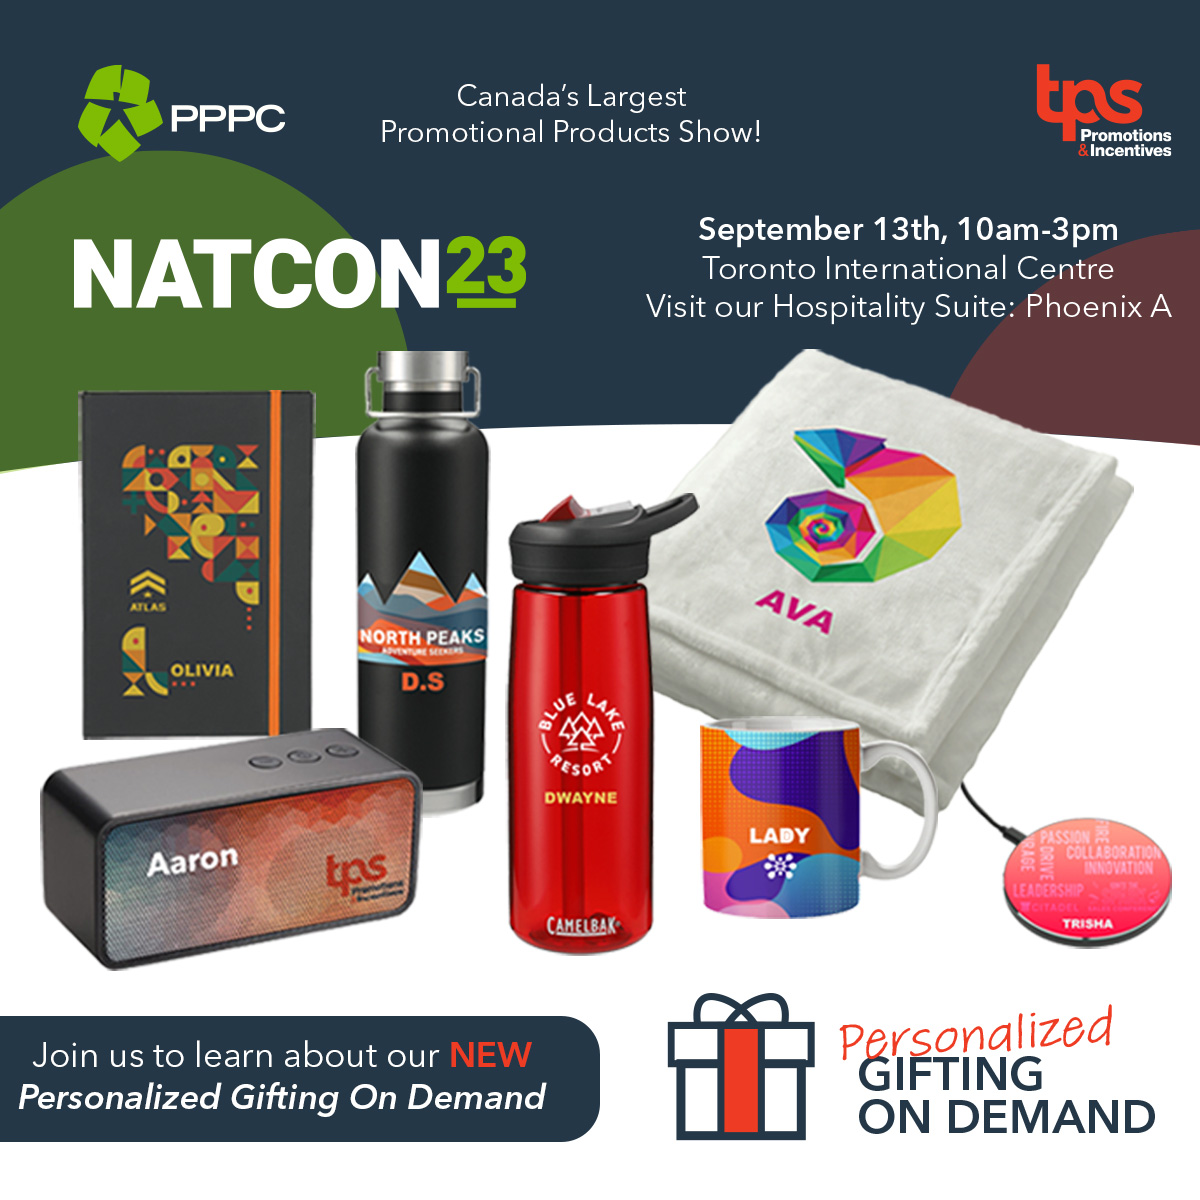 You’re Invited: TPS Personalized Gifting Solutions Launch at National Promotional Products Show! Register now! tpscan.com/natcon2023 Reconnect with your TPS Account Manager. We’ve got a few gifts for you! #promotionalproducts #holidaygifts #corporategifting #corporategifts